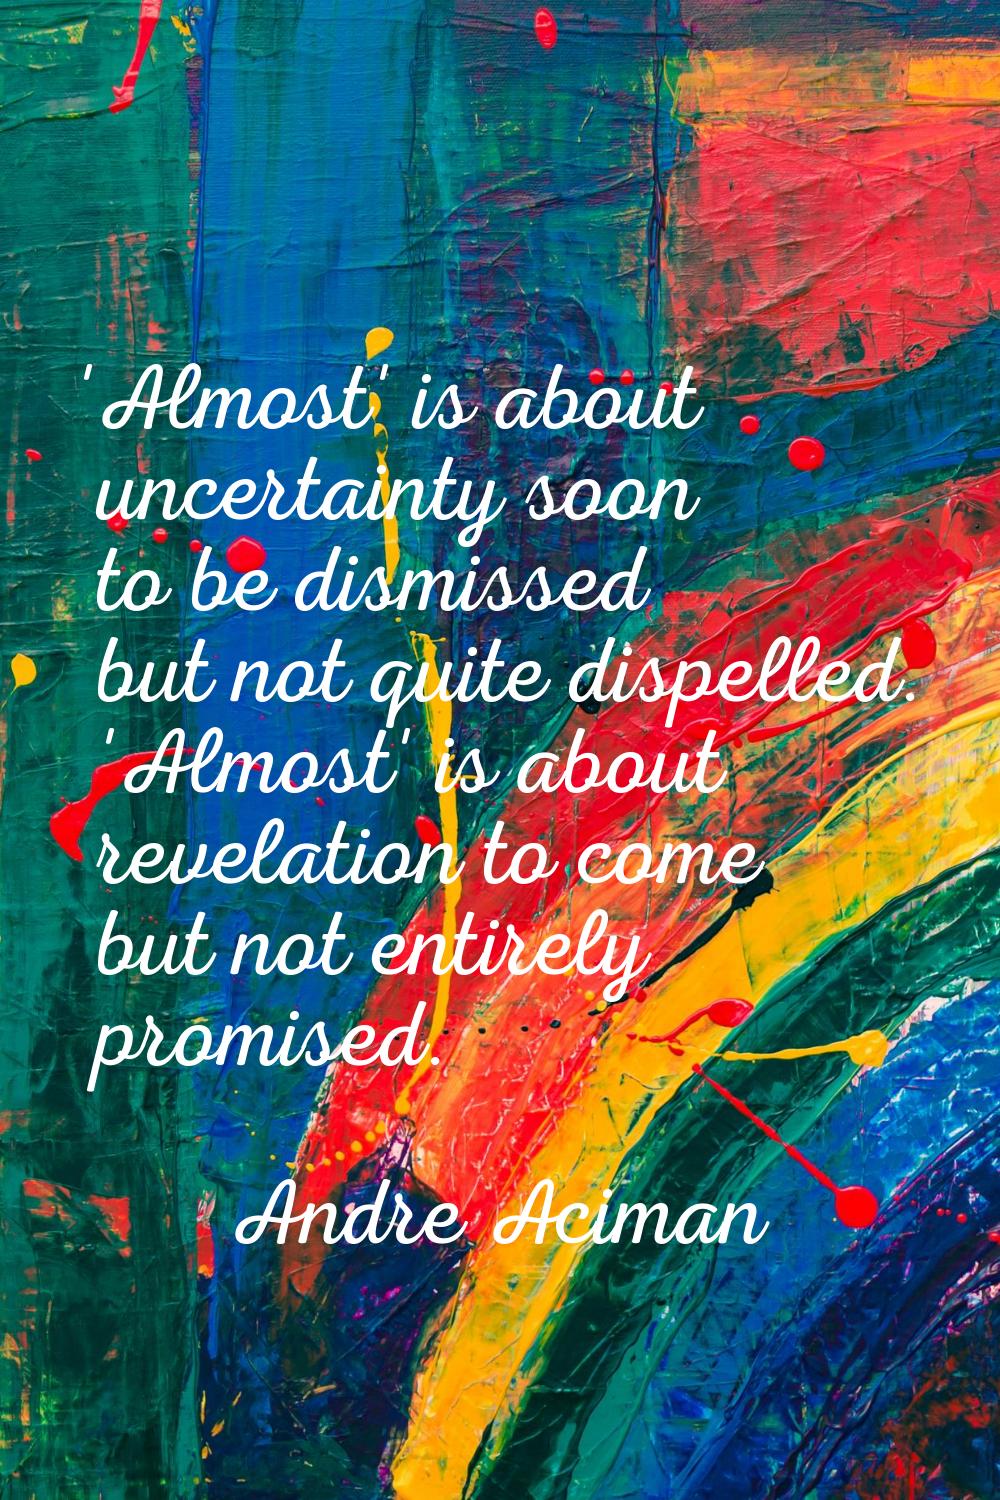 'Almost' is about uncertainty soon to be dismissed but not quite dispelled. 'Almost' is about revel